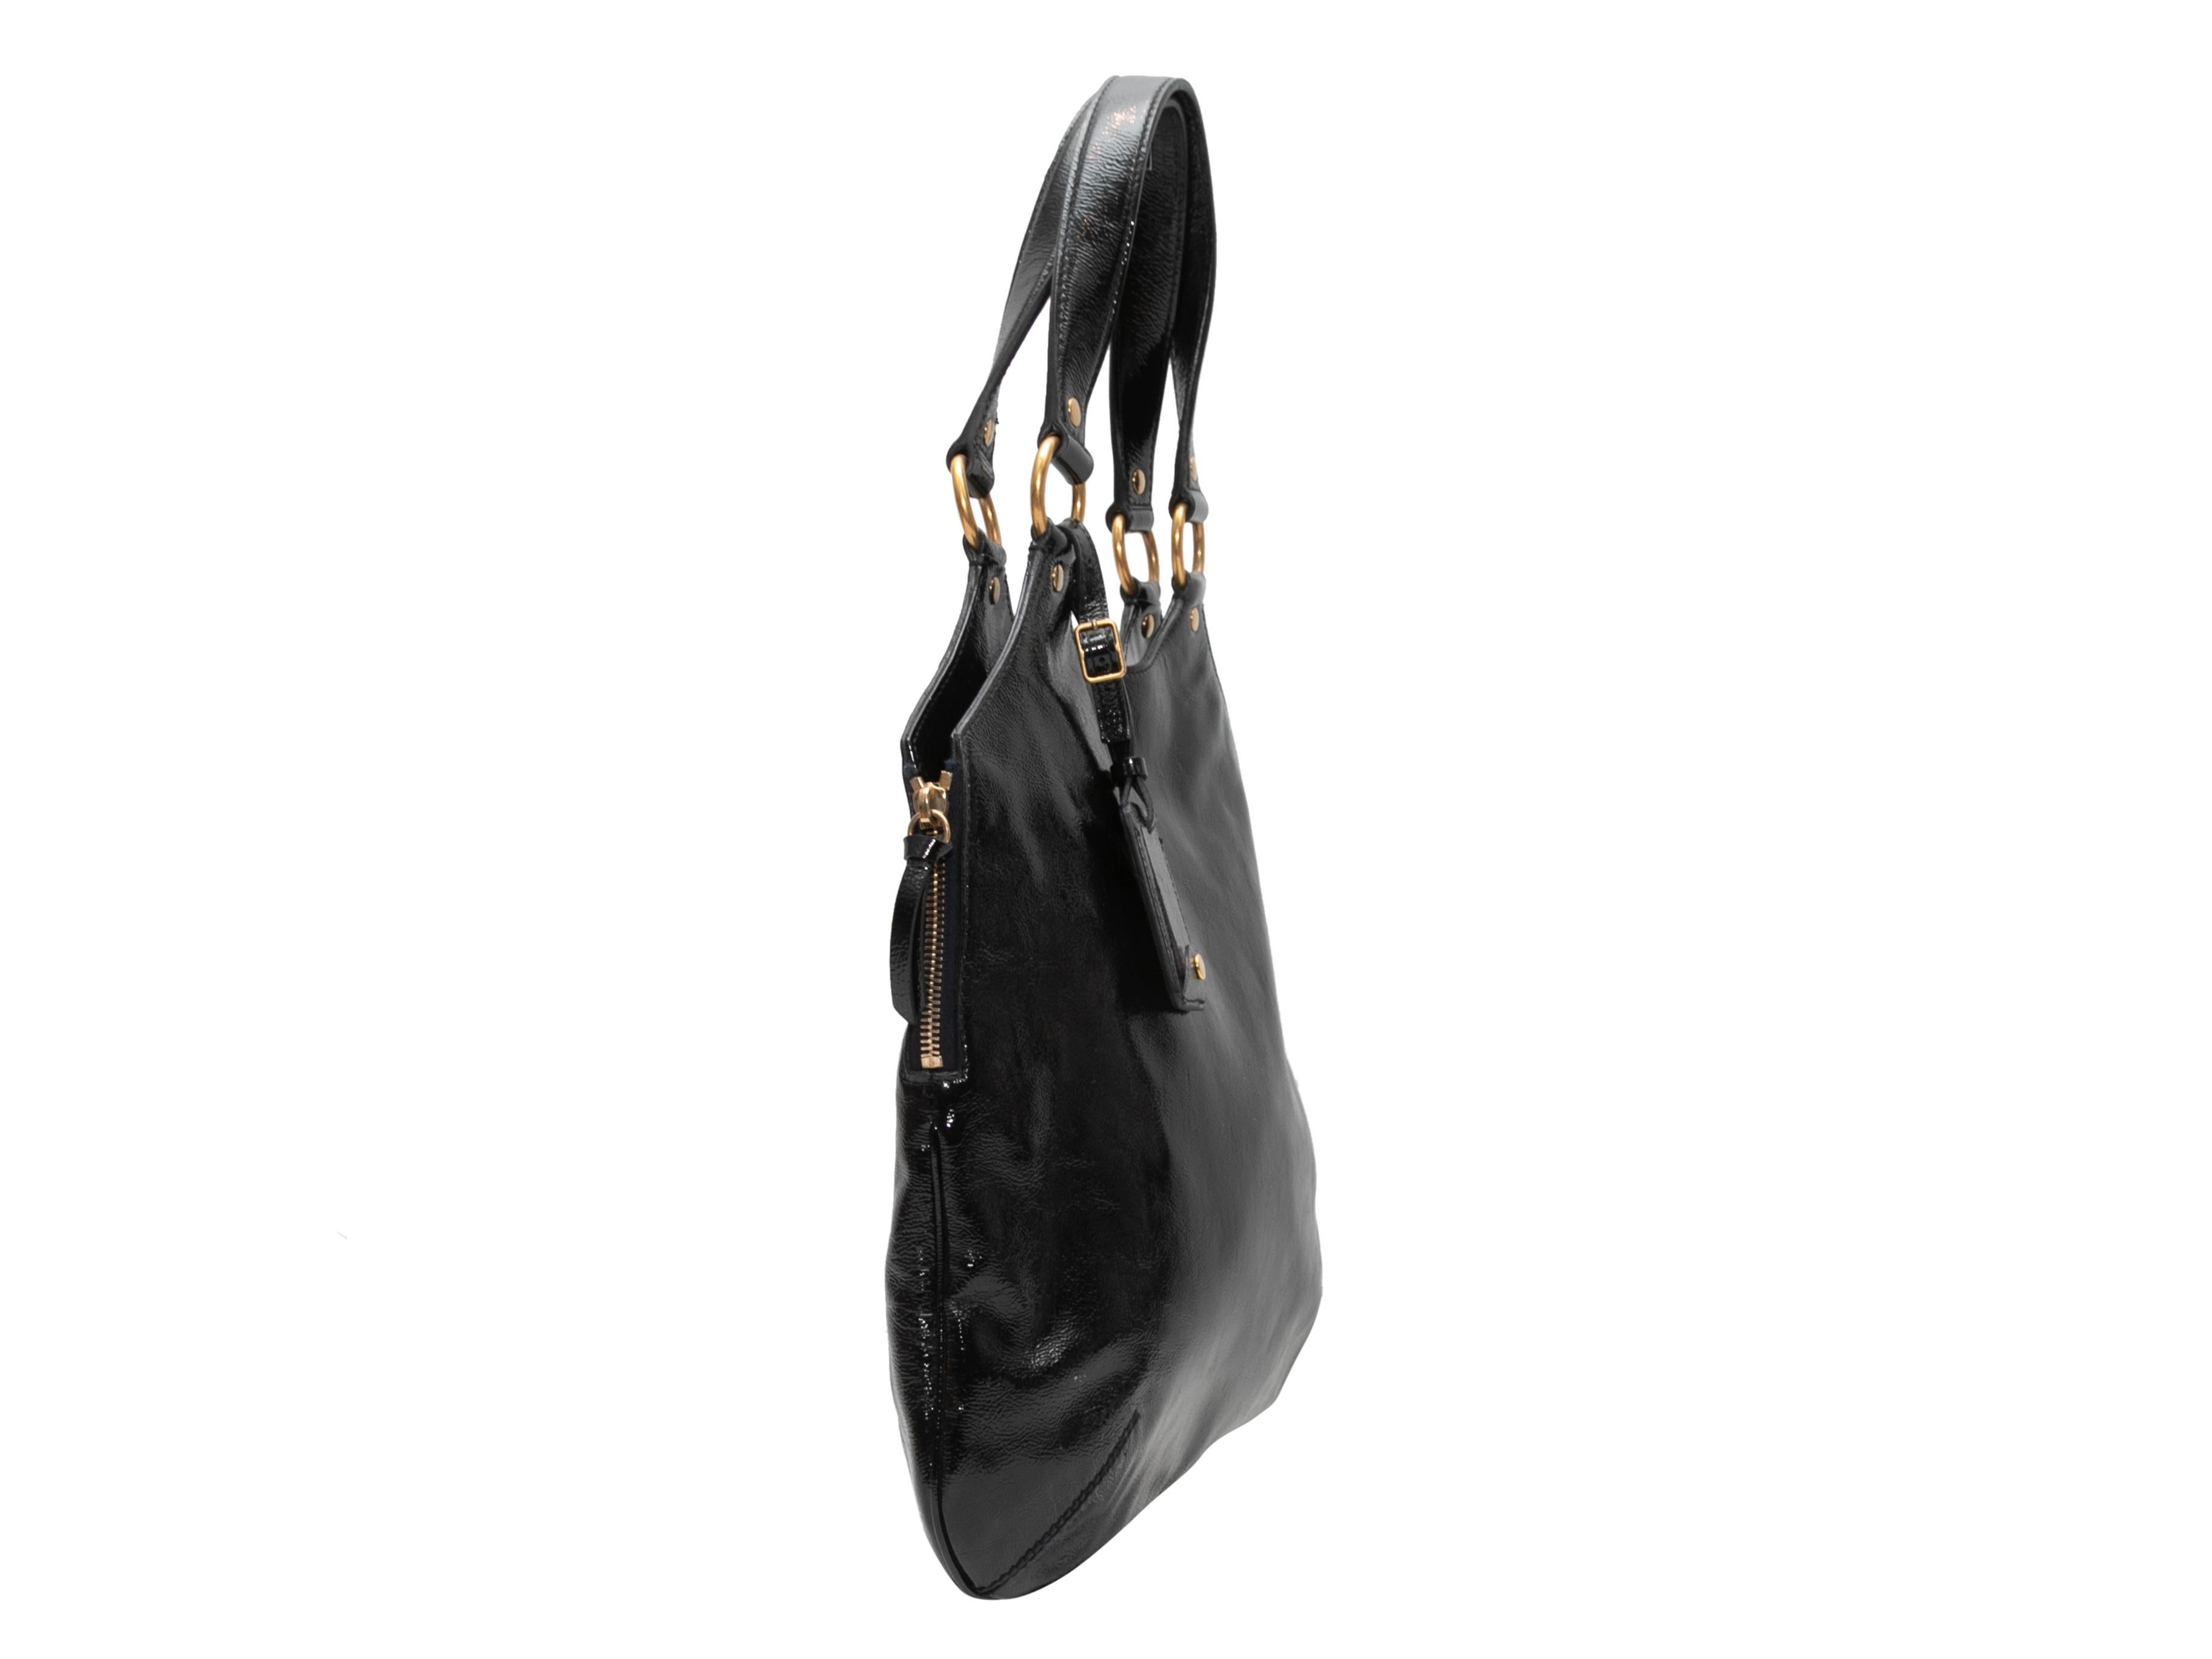 Black Yves Saint Laurent Patent Leather Handbag In Good Condition For Sale In New York, NY